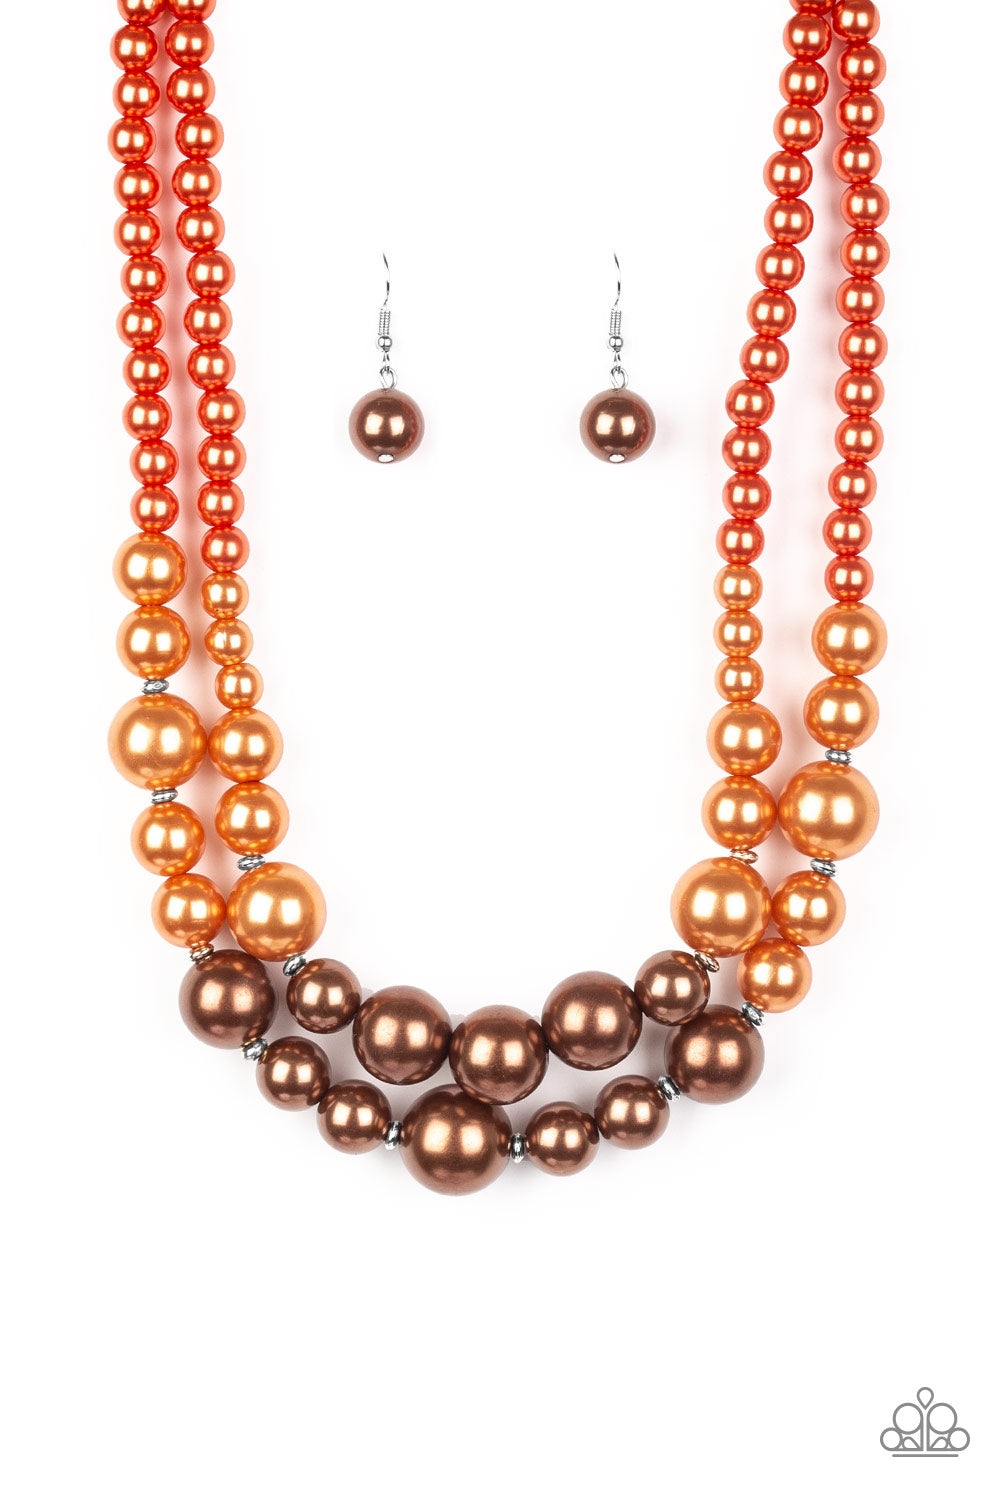 The More The Modest Multi Paparazzi Necklaces Cashmere Pink Jewels - Cashmere Pink Jewels & Accessories, Cashmere Pink Jewels & Accessories - Paparazzi